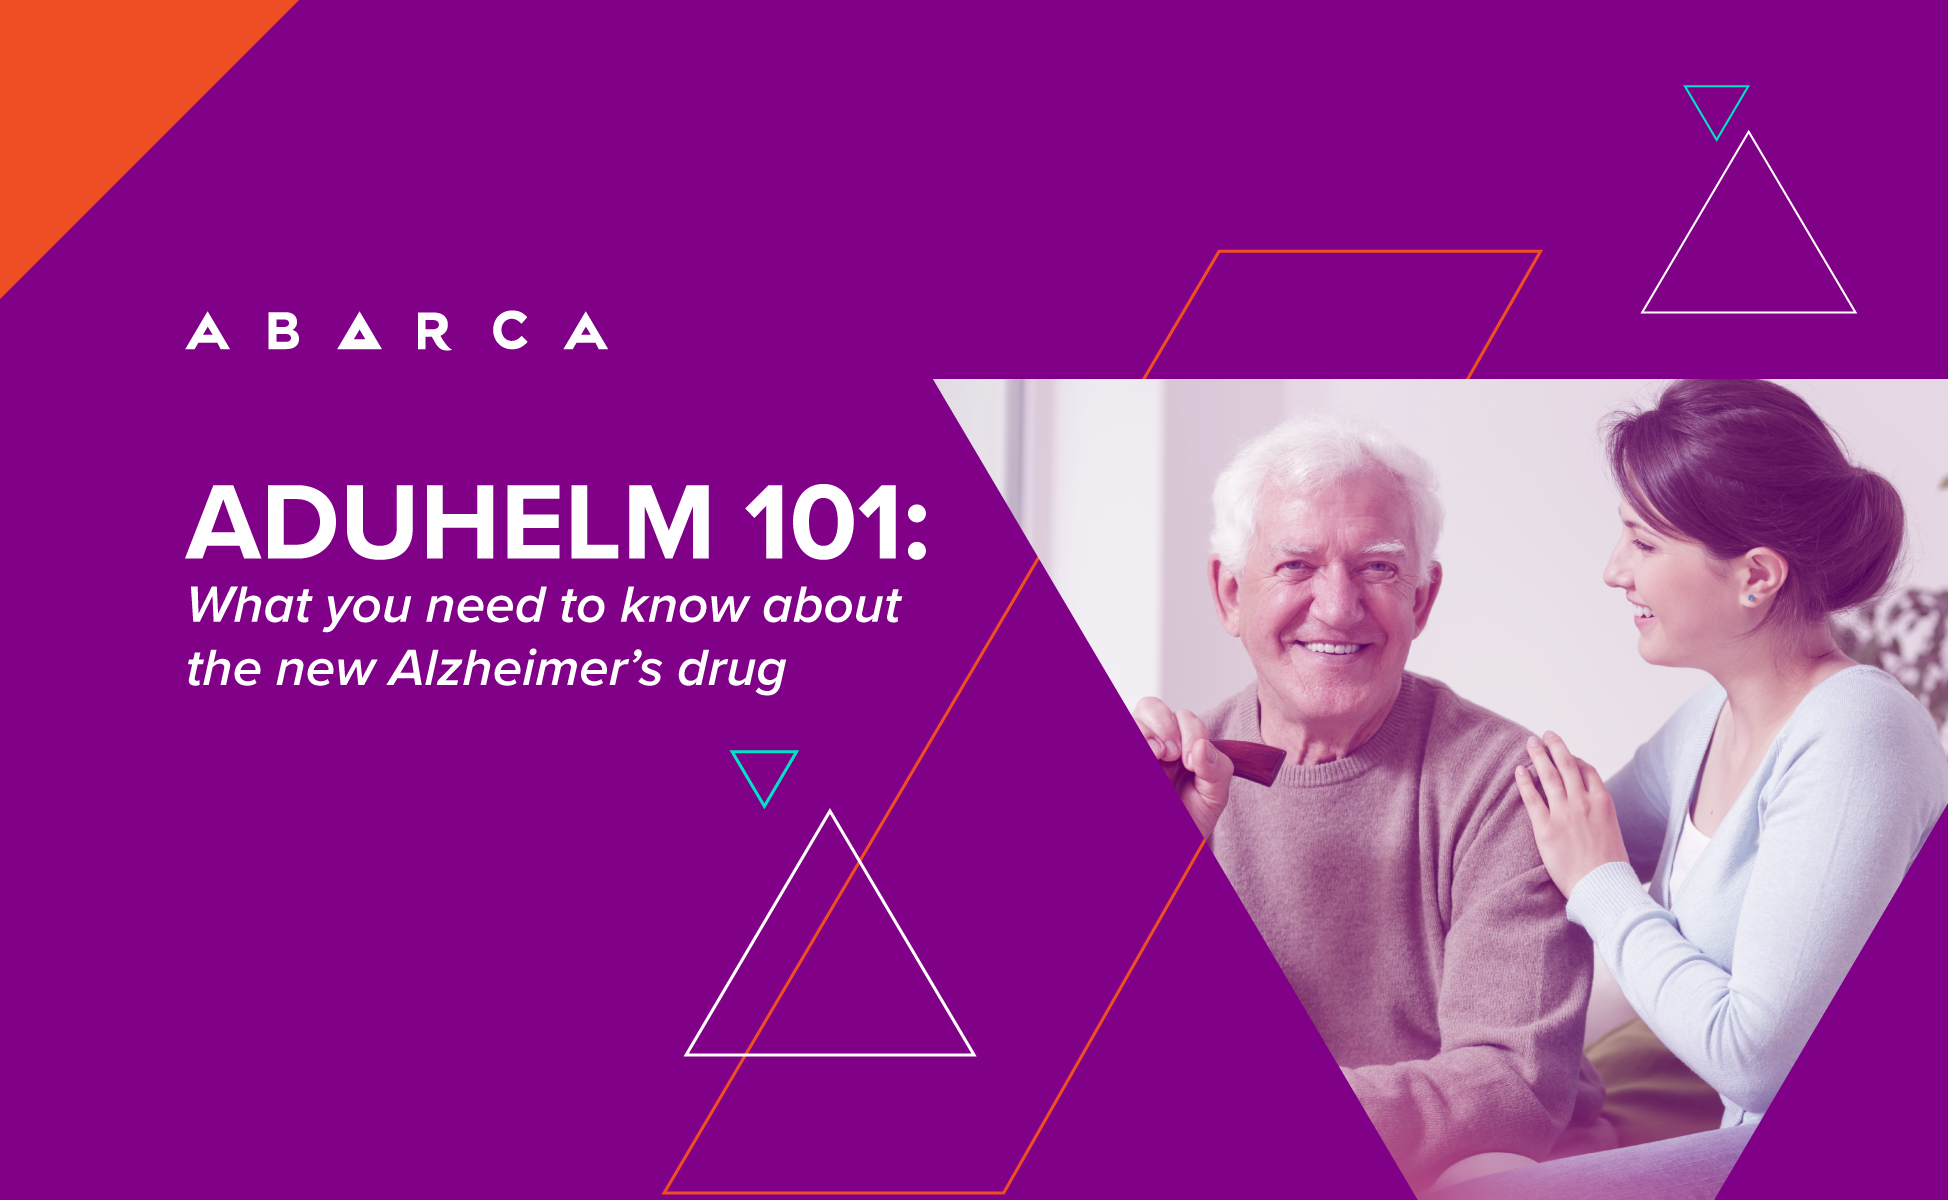 Abarca Health: Aduhelm 101: What you need to know about the new Alzheimer’s drug